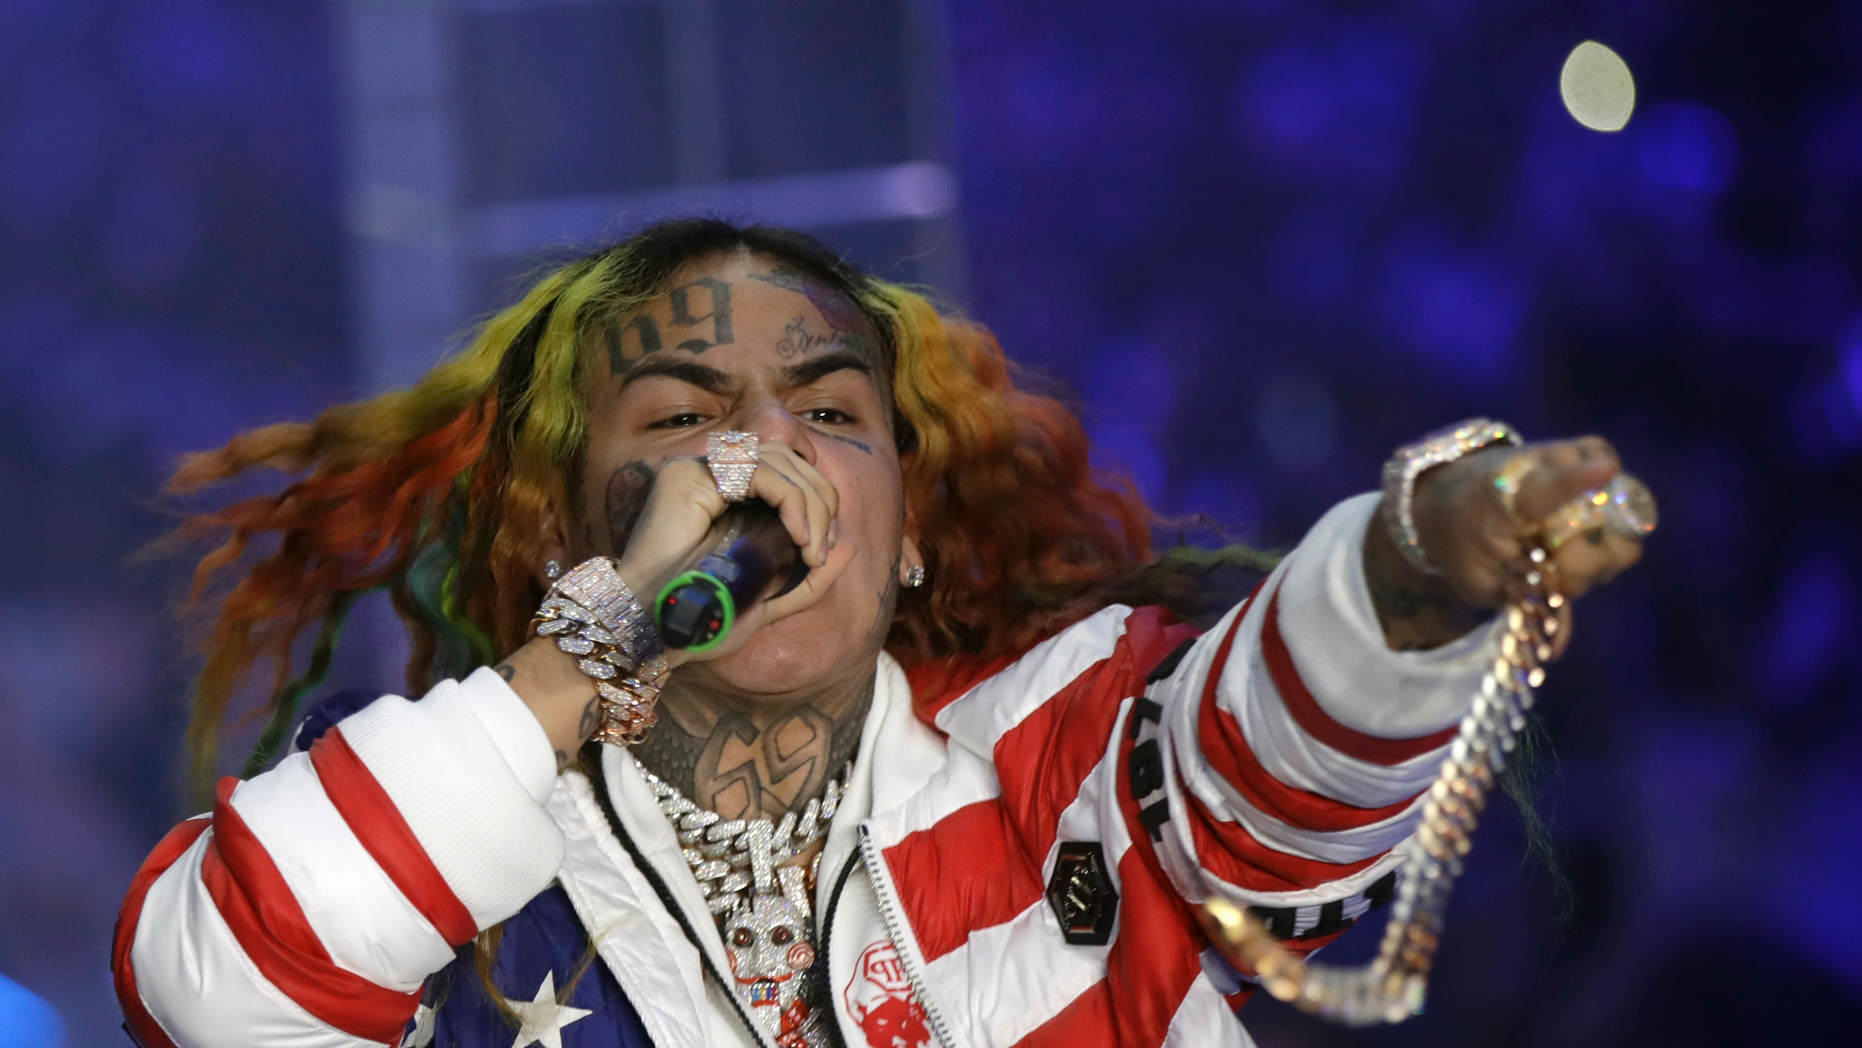 Tekashi 6ix9ine may be cutting a deal with federal investigators from prison